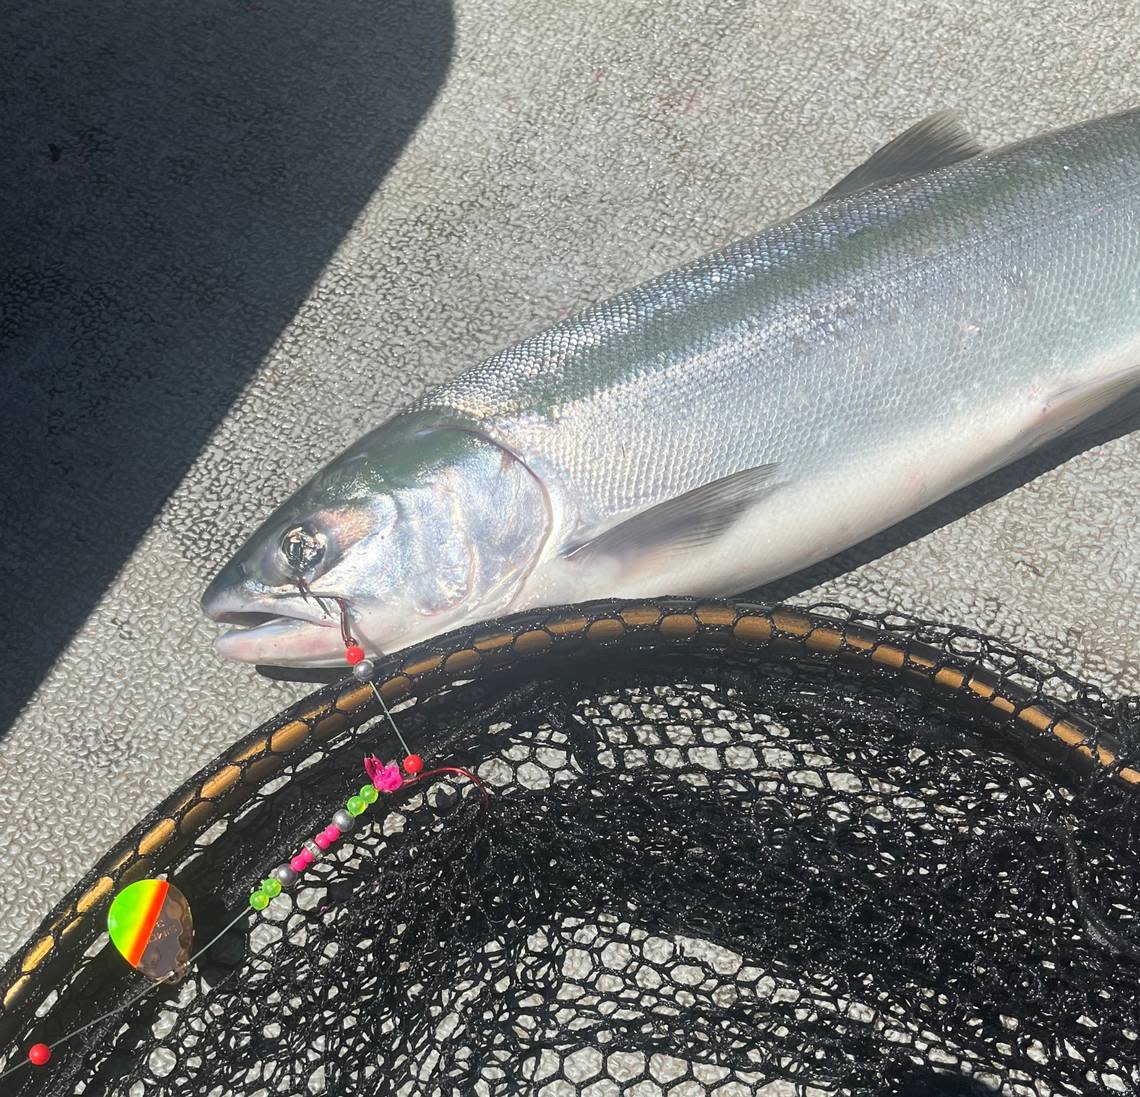 A Colorado-type spinner with beads fished off a lead ball dropper fooled this mint-bright 20-inch sockeye salmon.